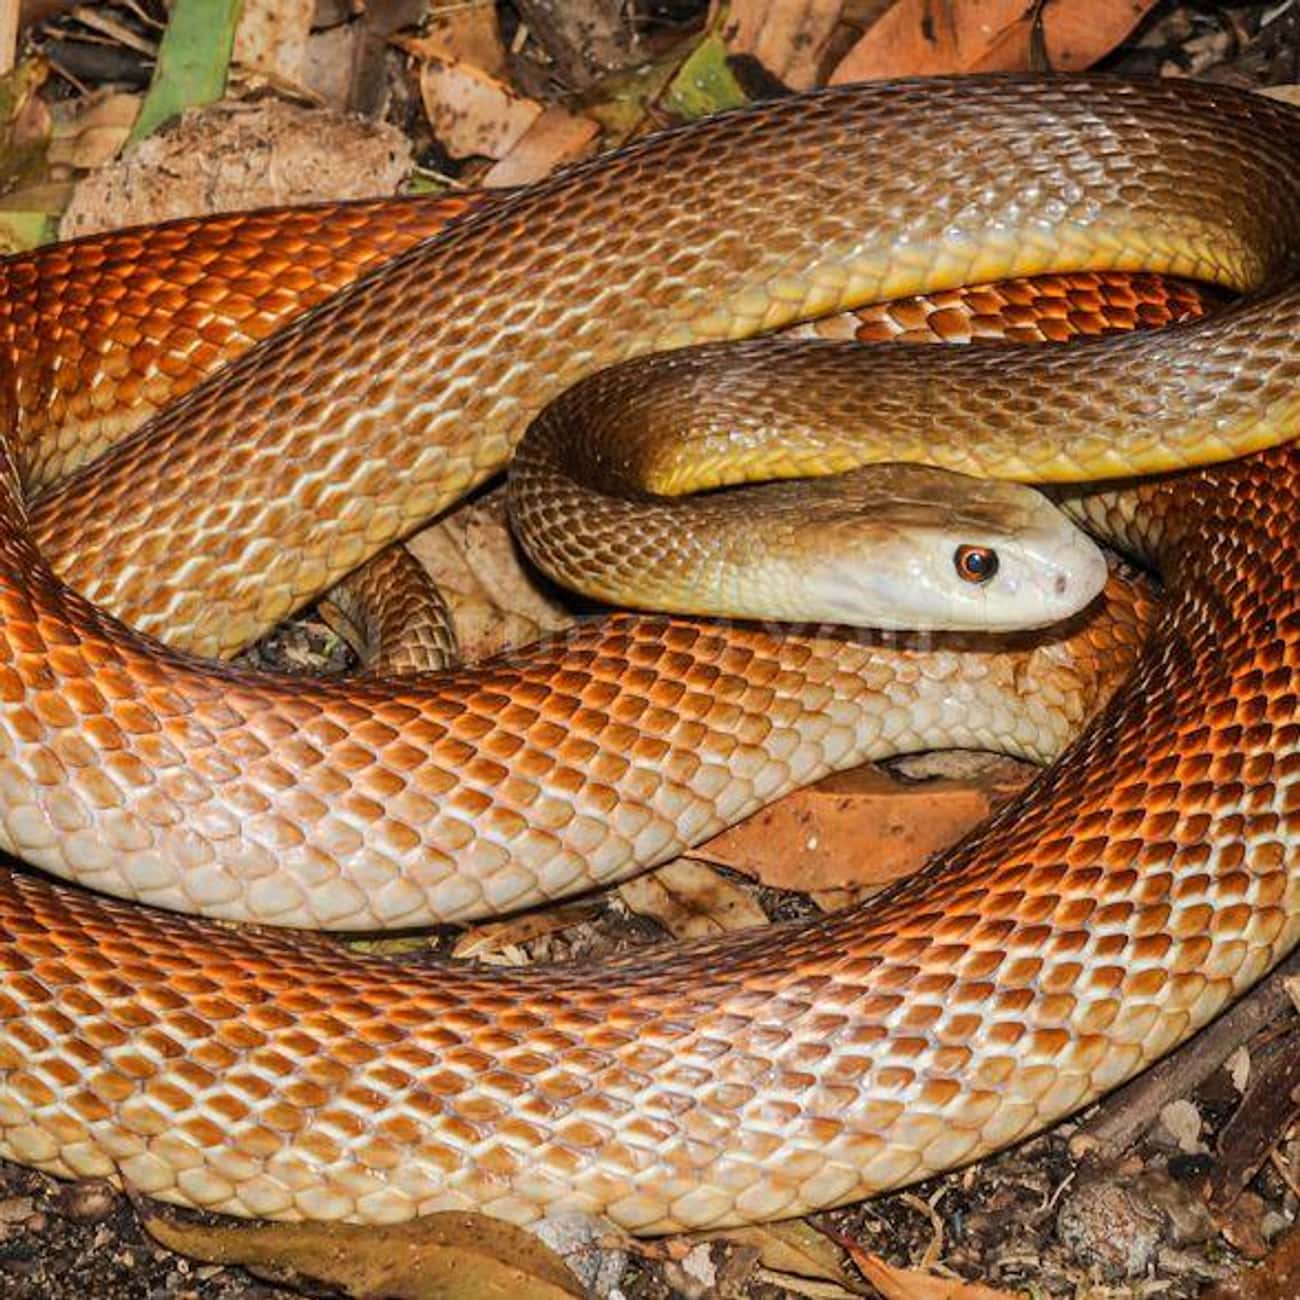 21 Of The Most Venomous & Poisonous Snakes In The World